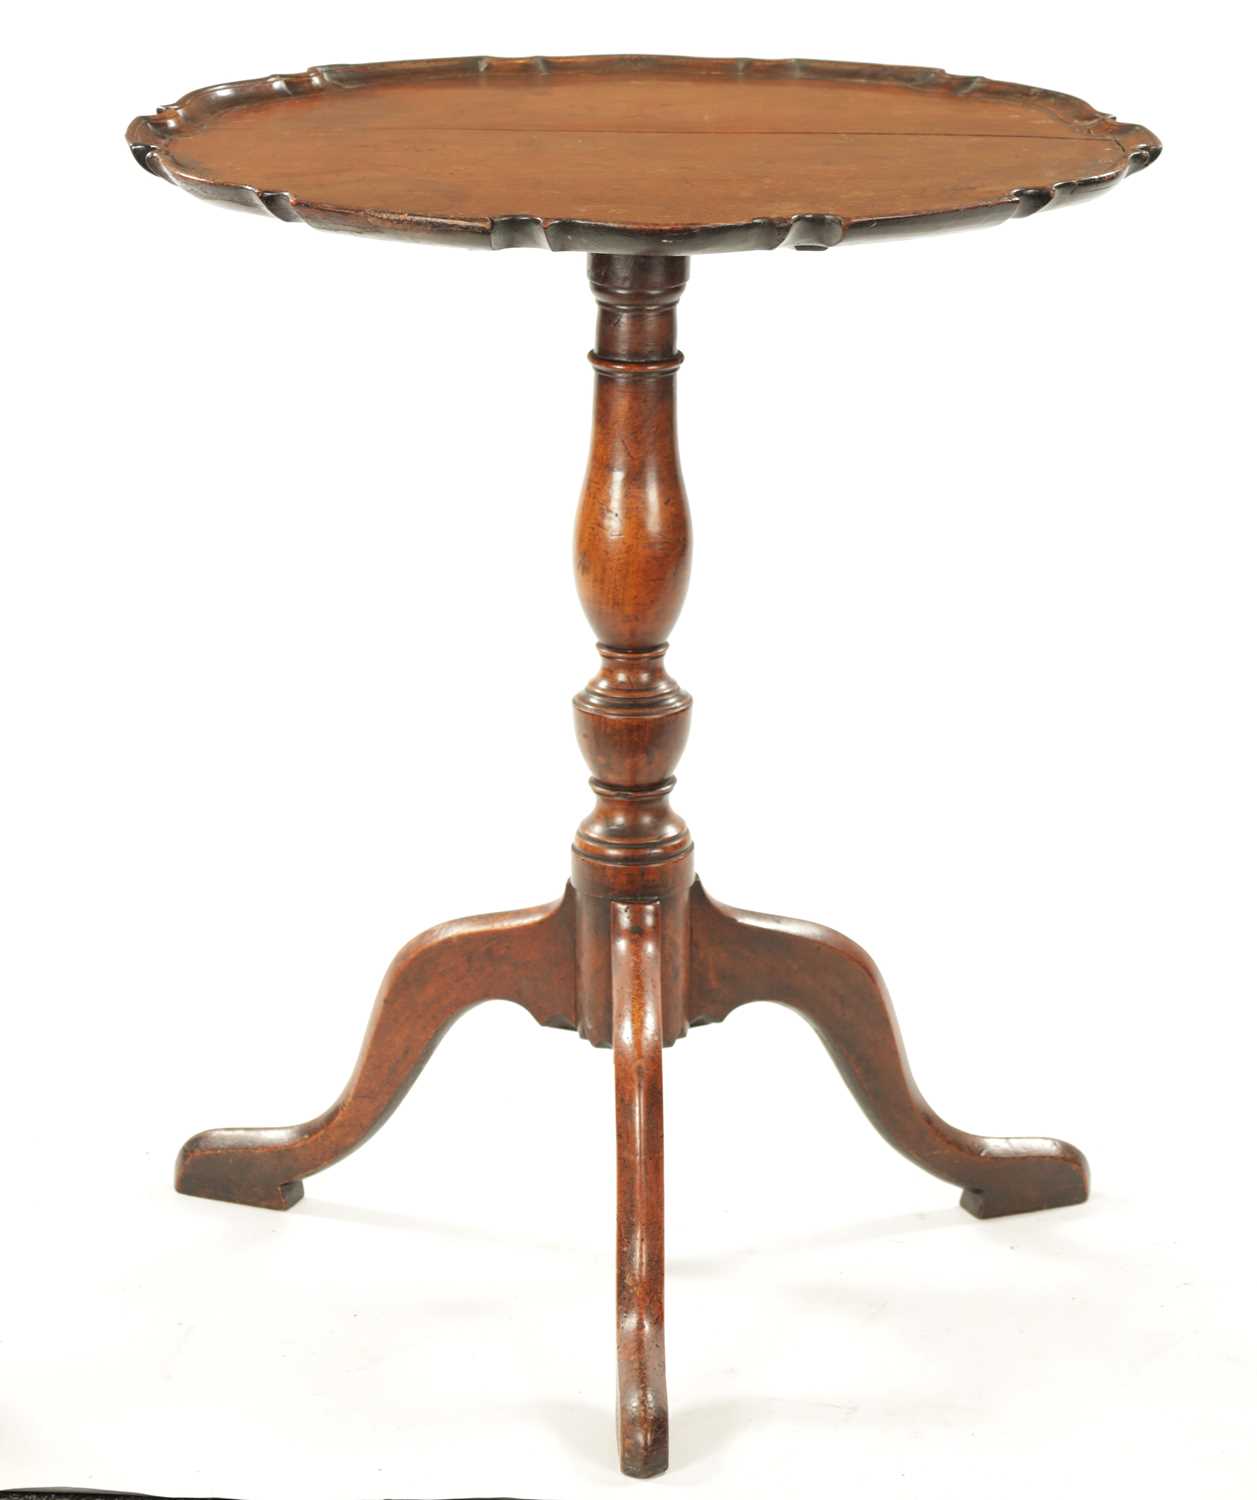 AN 18TH CENTURY COUNTRY MADE MAHOGANY TILT TOP TRIPOD TABLE - Image 7 of 9